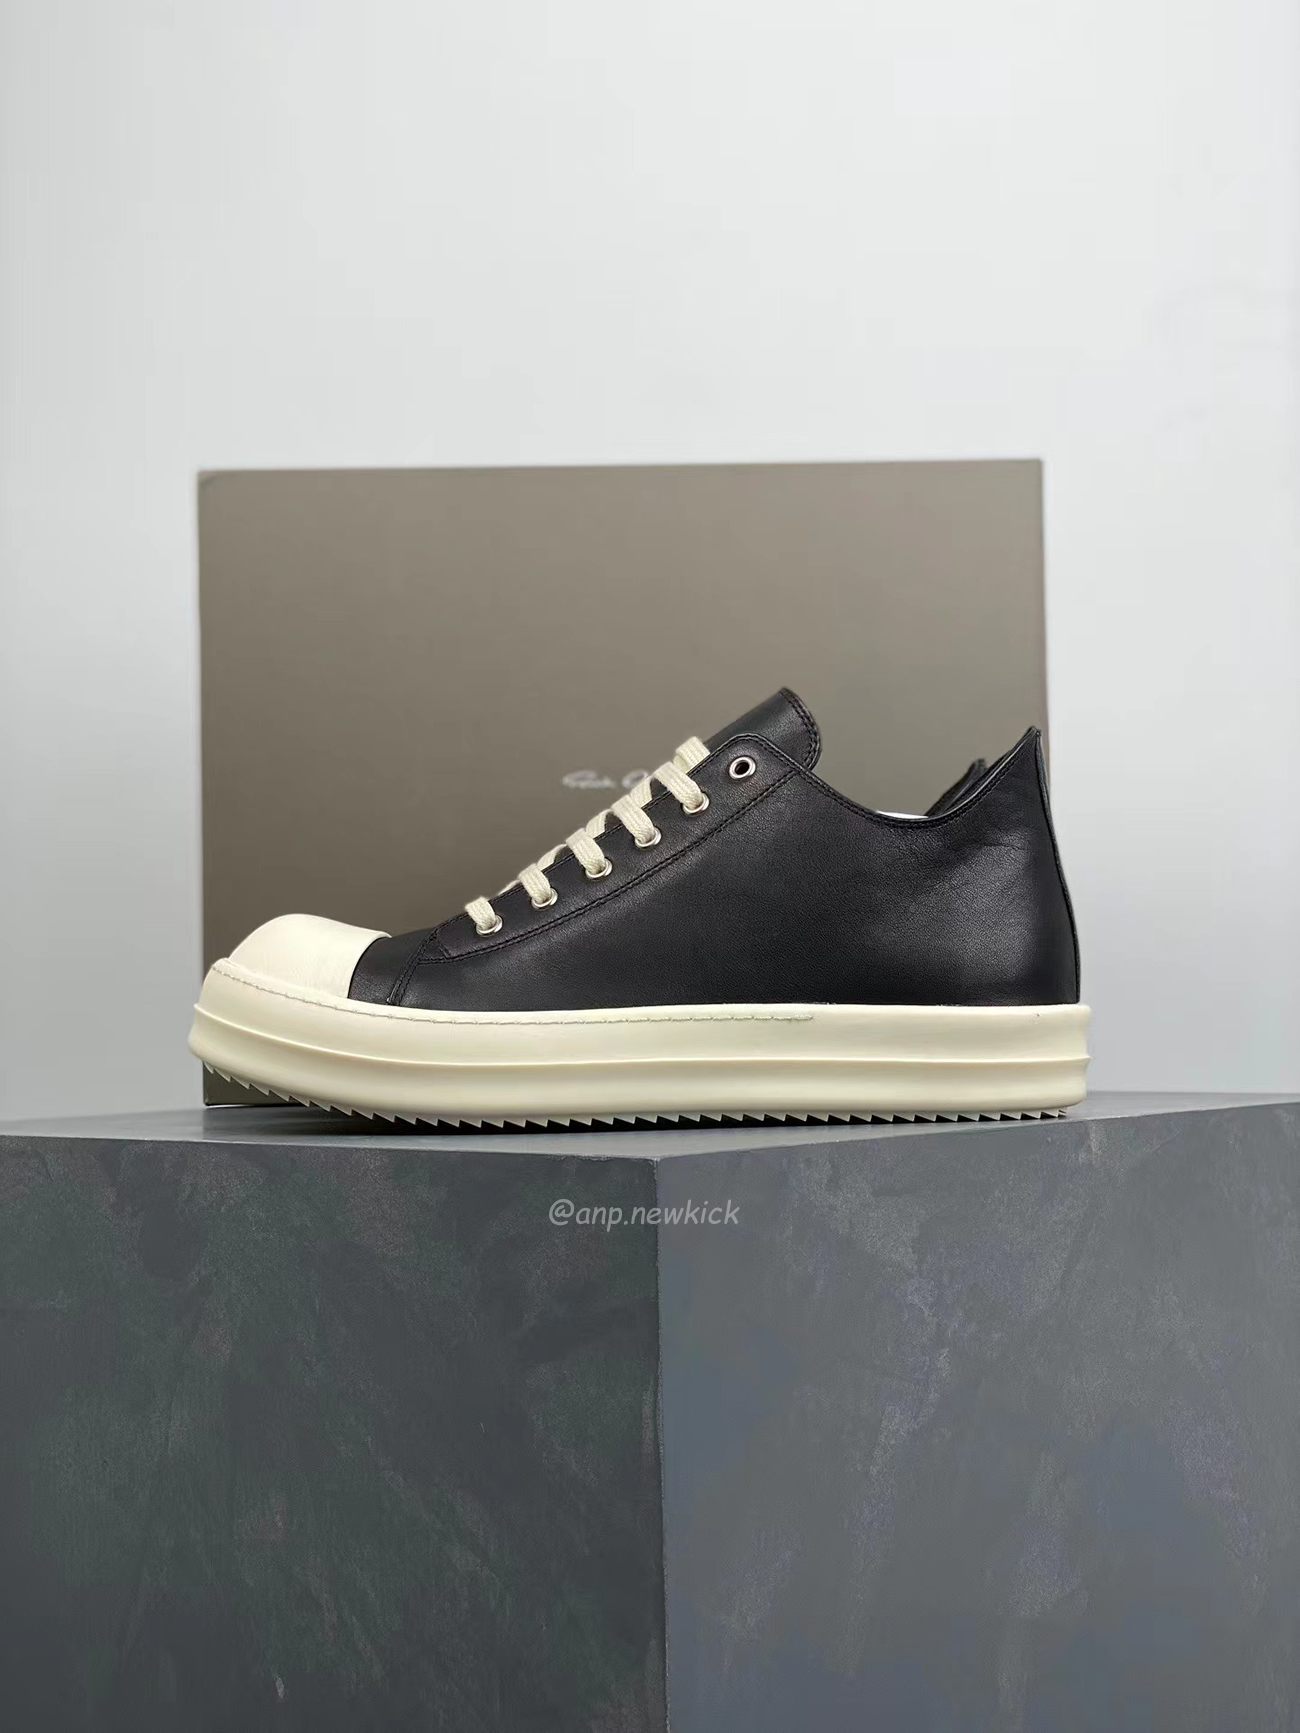 Rick Owens Leather Low Top Vintage Sneakers Suede Canvas Black Taupe Grey Faded Pnk Pearl Milk Dark Dust (26) - newkick.org